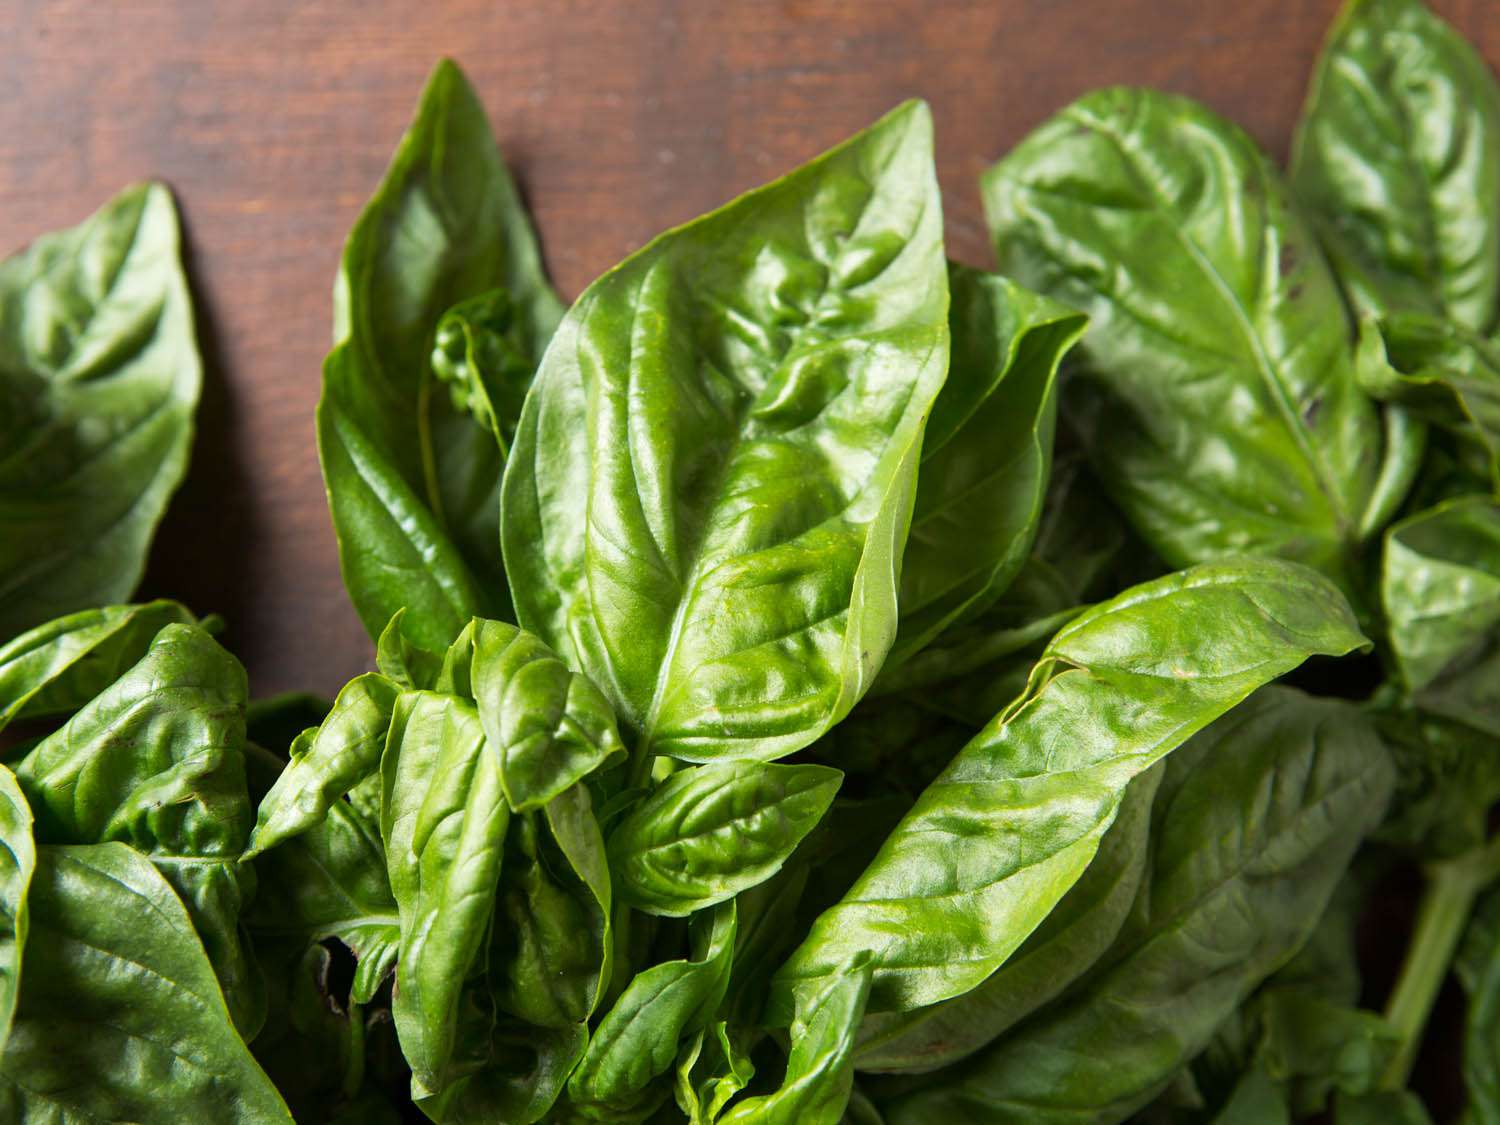 A close-up photograph of bunches of fresh basil leaves on a wooden cutting board.